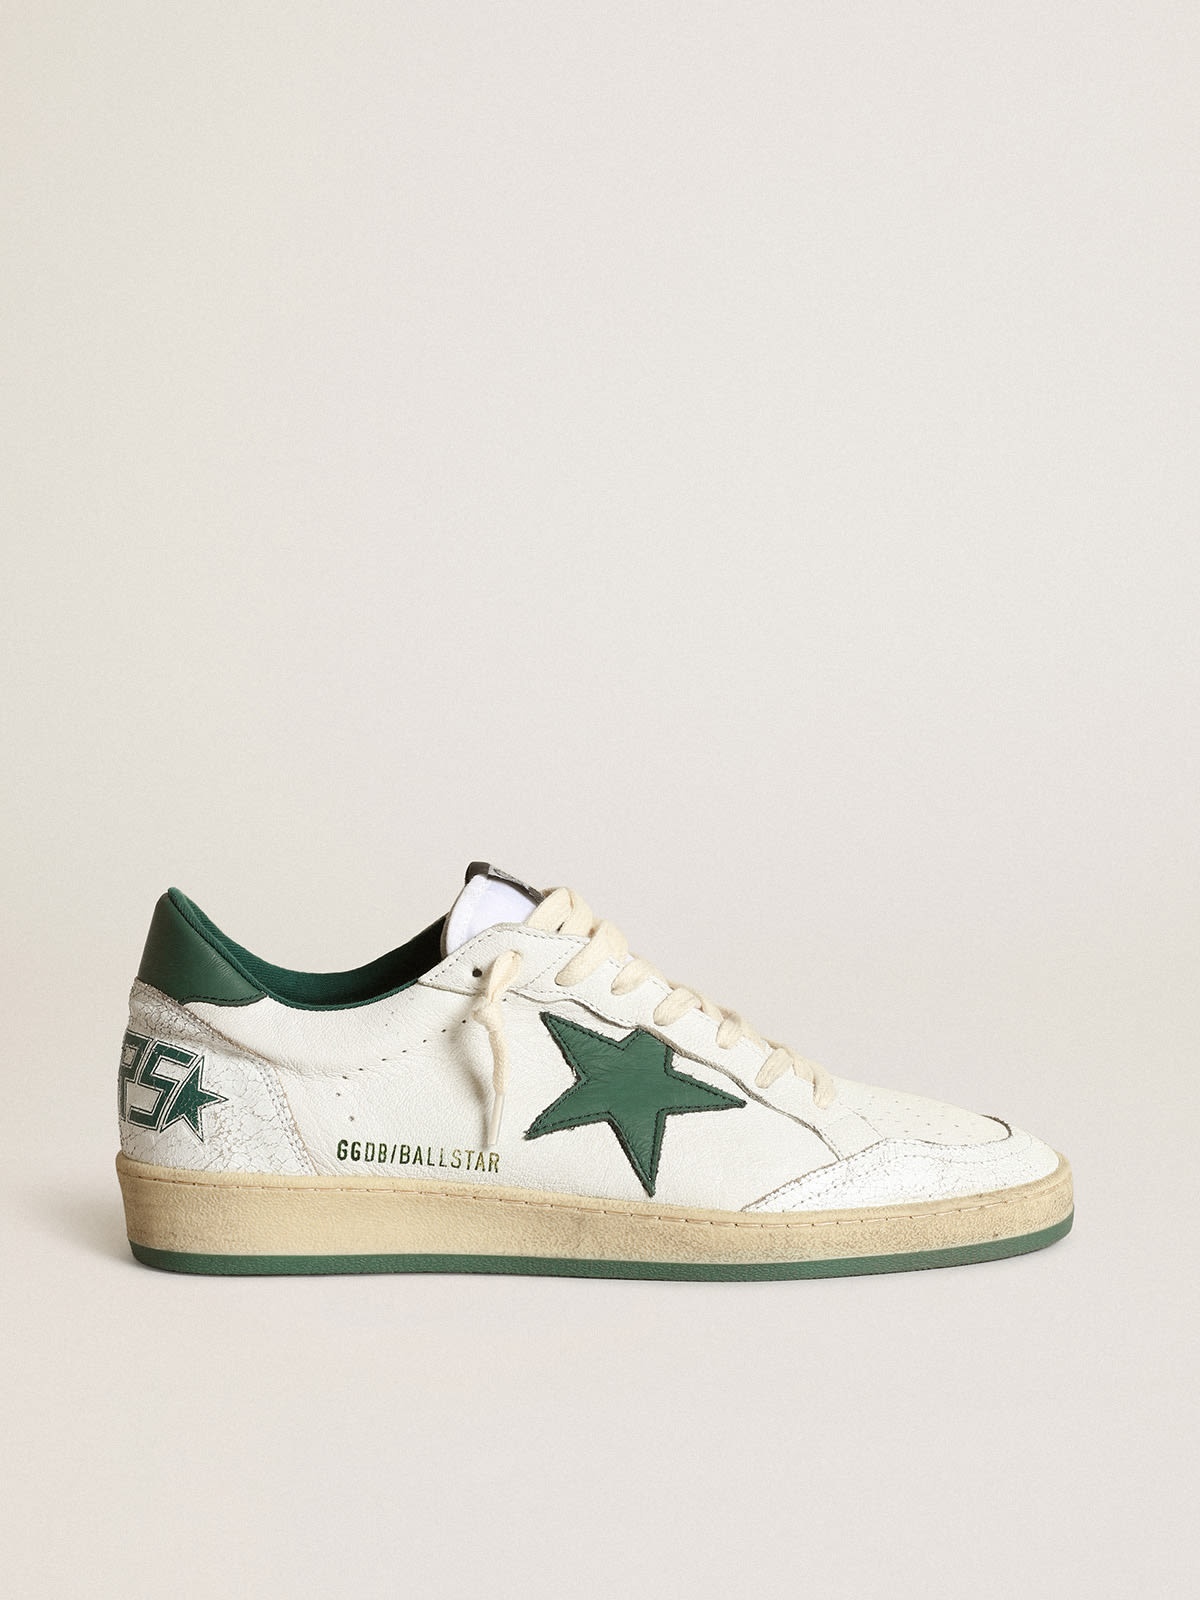 Women's Ball Star in white nappa leather with green leather star and heel tab - 1